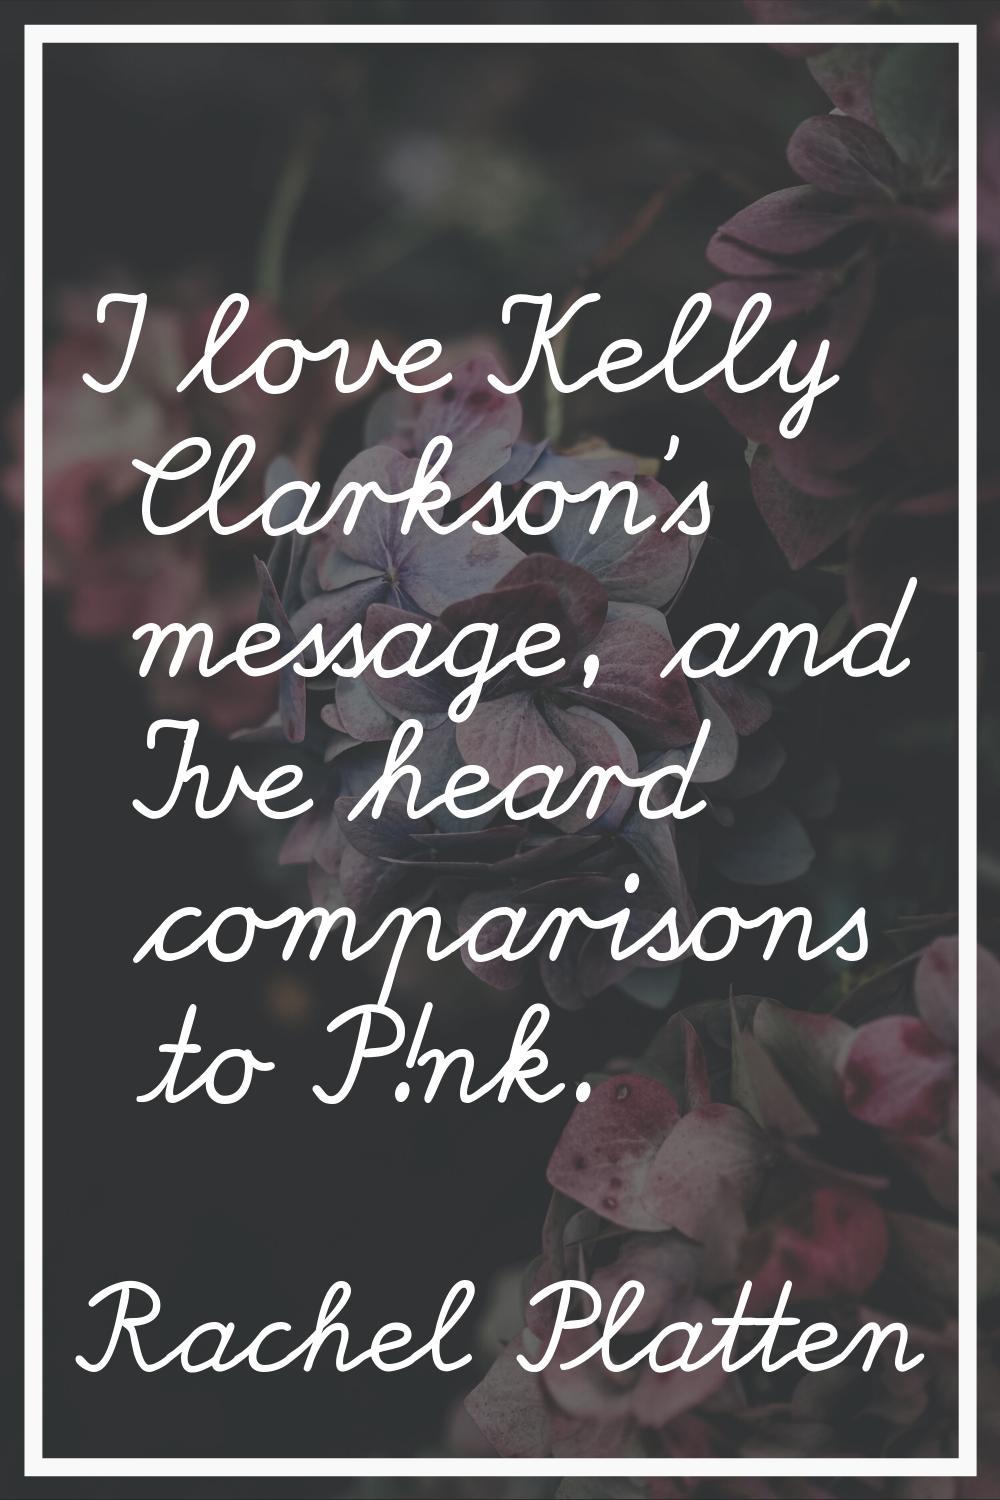 I love Kelly Clarkson's message, and I've heard comparisons to P!nk.